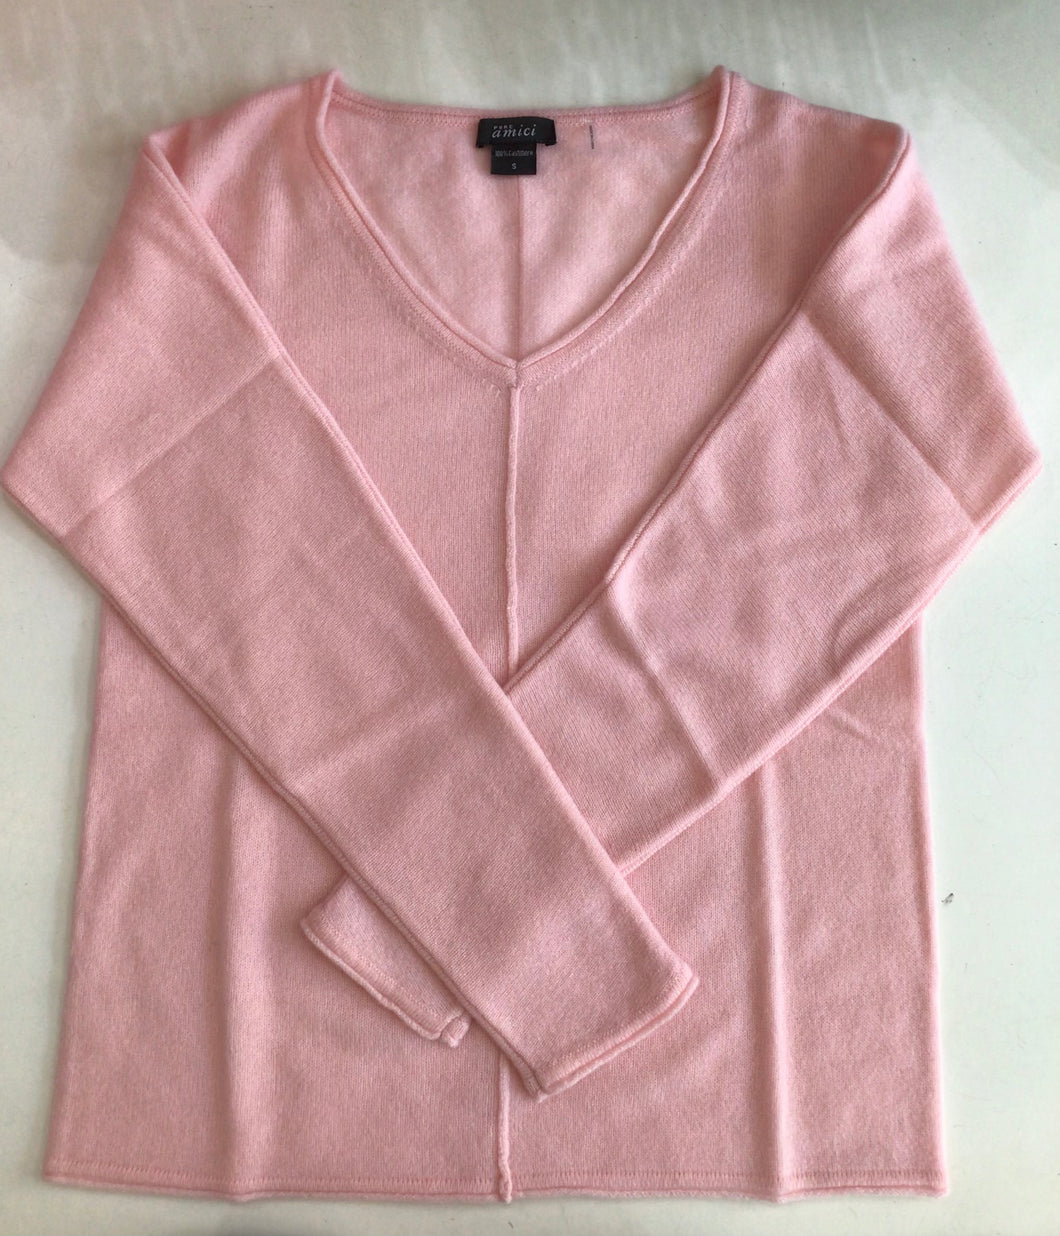 V Neck Cashmere Sweater in Blush Pink by Pure Amici